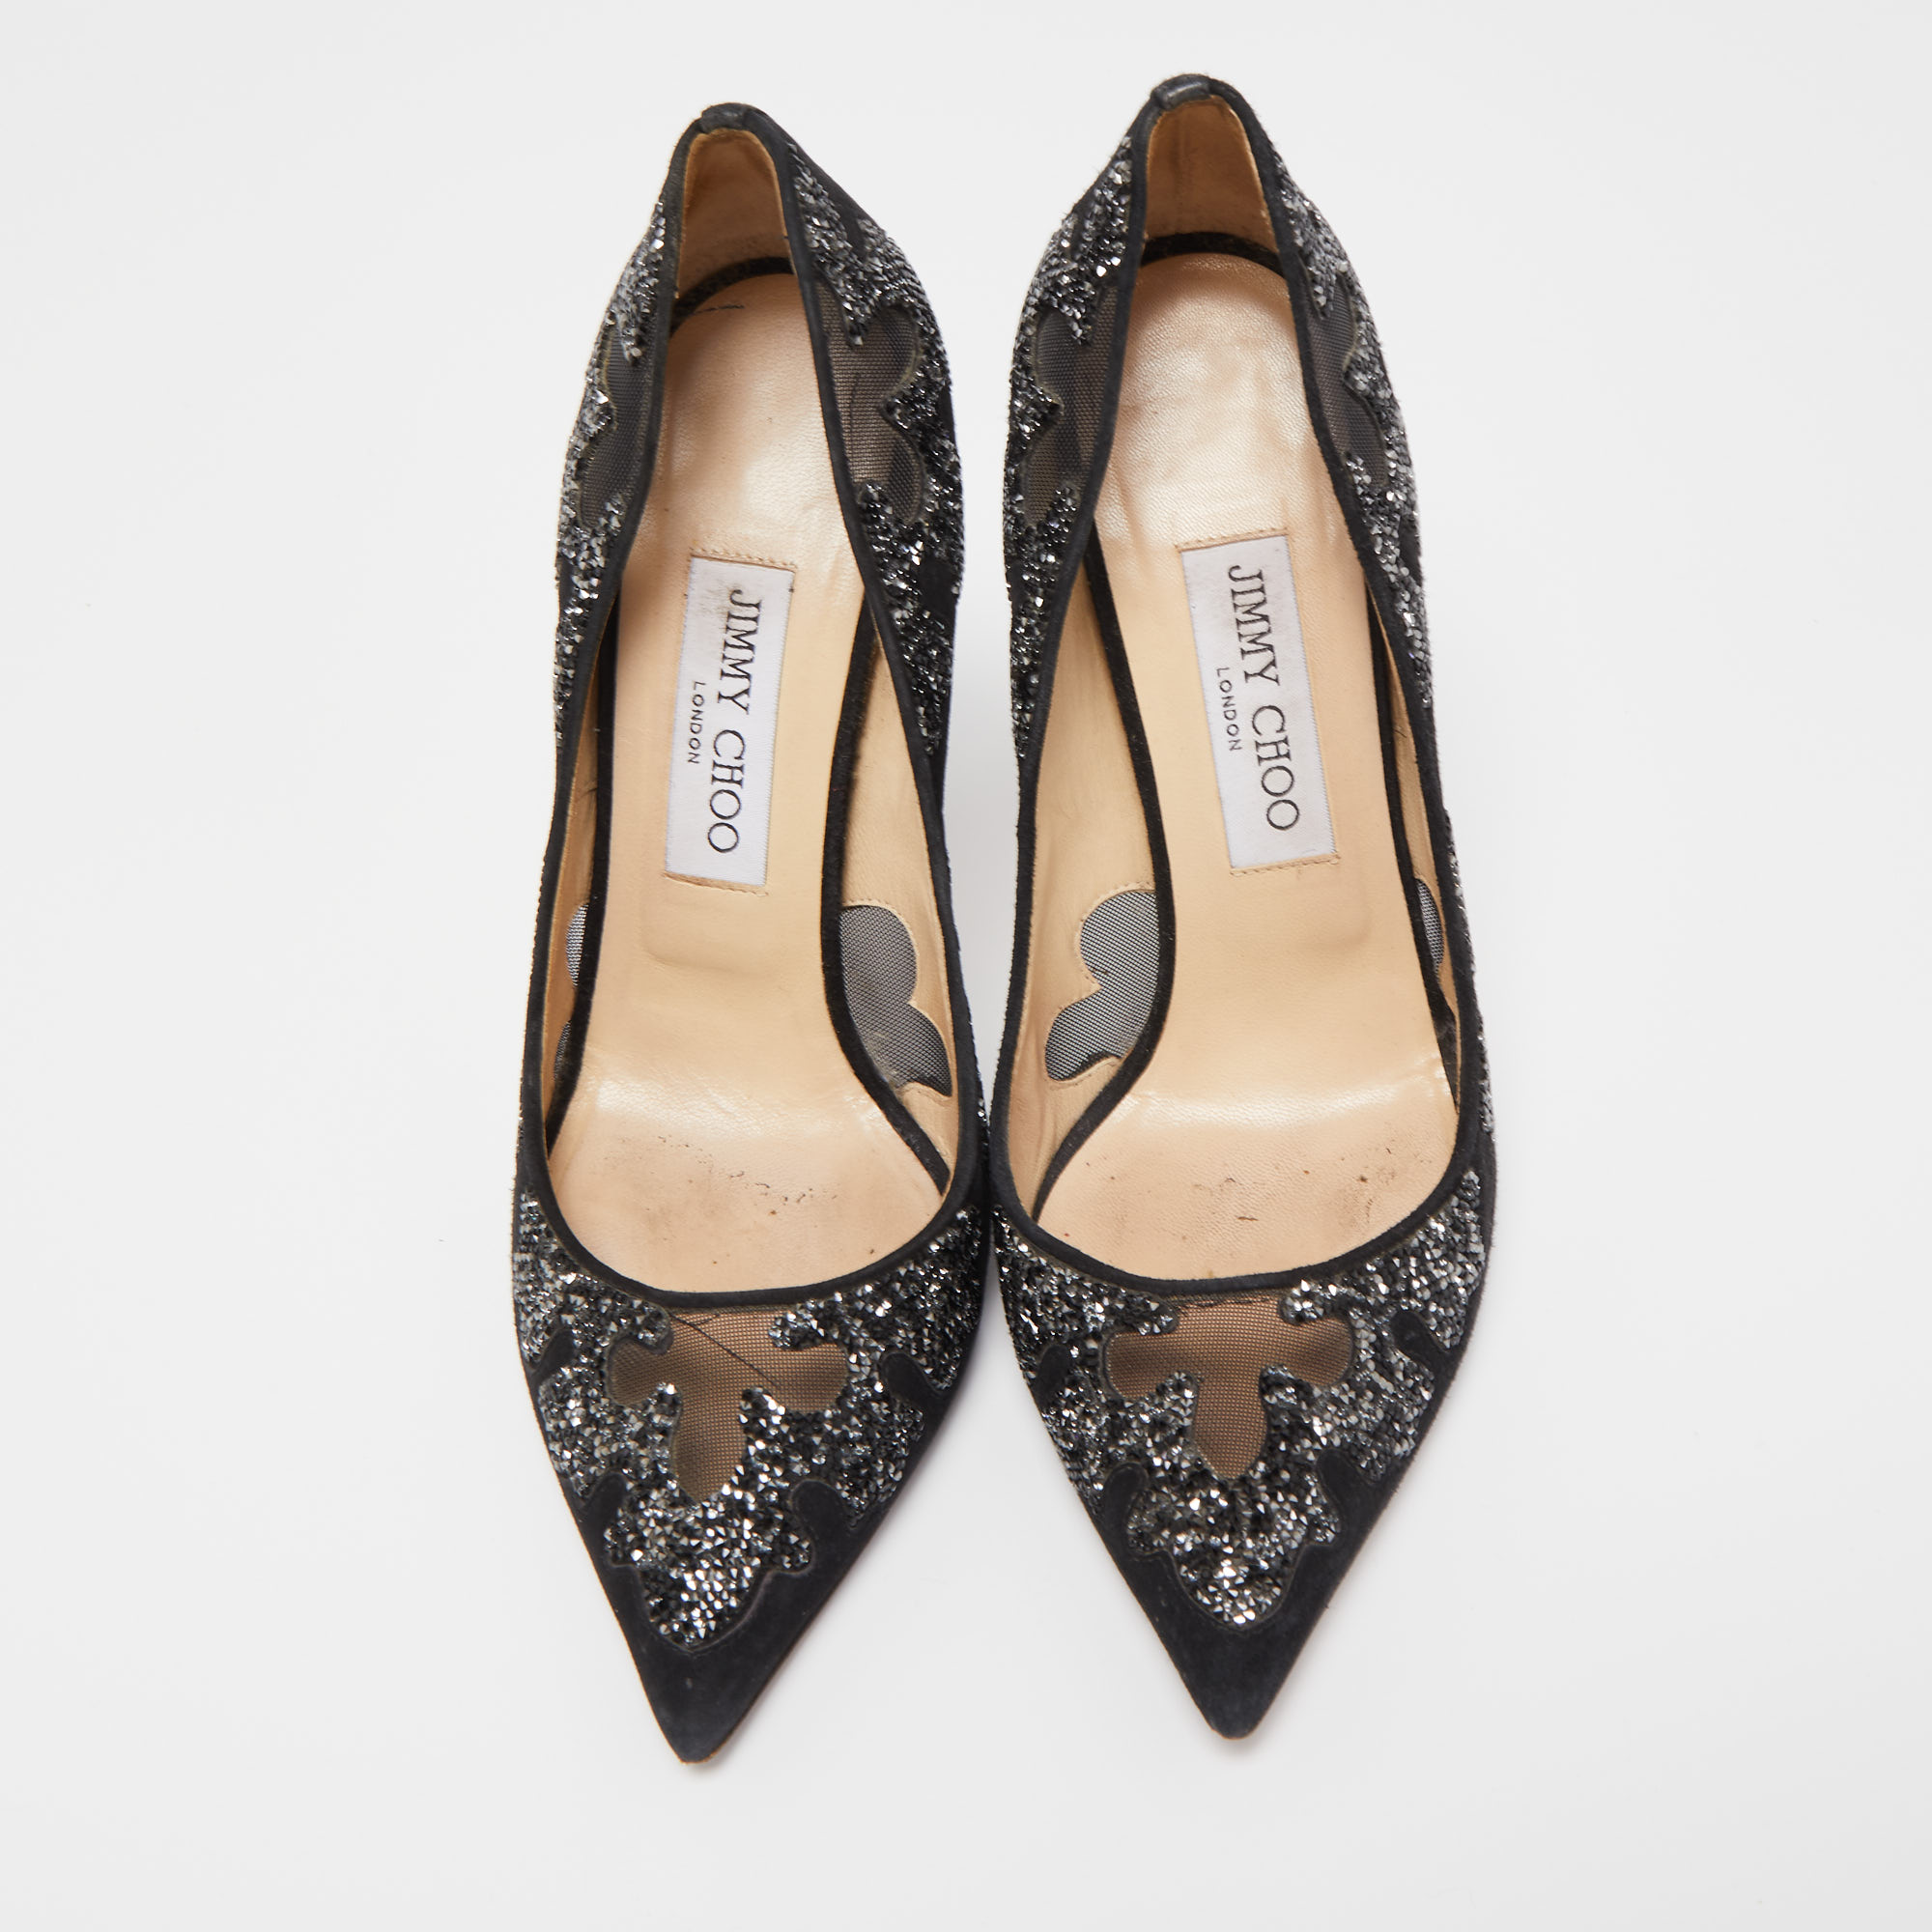 Jimmy Choo Black Suede And Mesh Crystal Pointed Toe Pumps Size 38.5